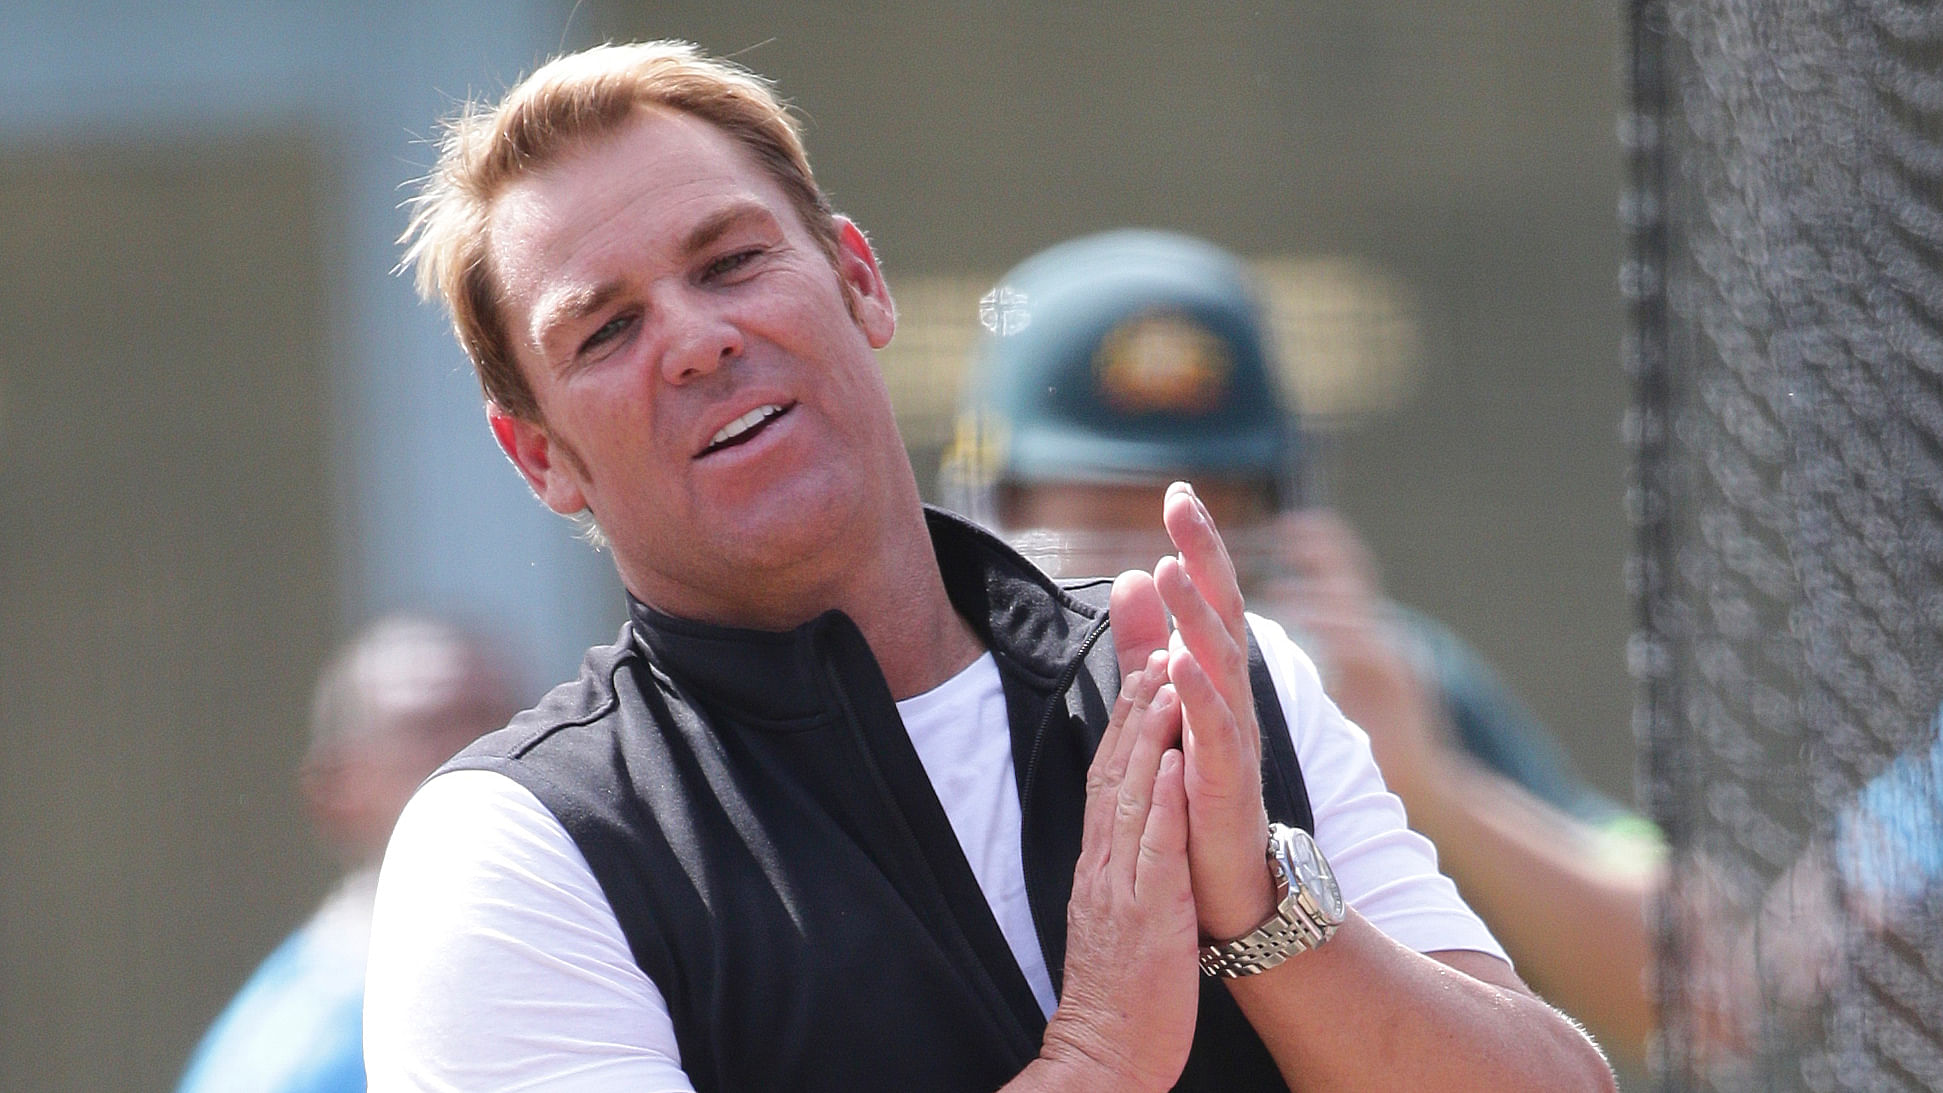 Australian spin legend Shane Warne feels the team suffered “a real punch in the guts” in the second ODI against England.